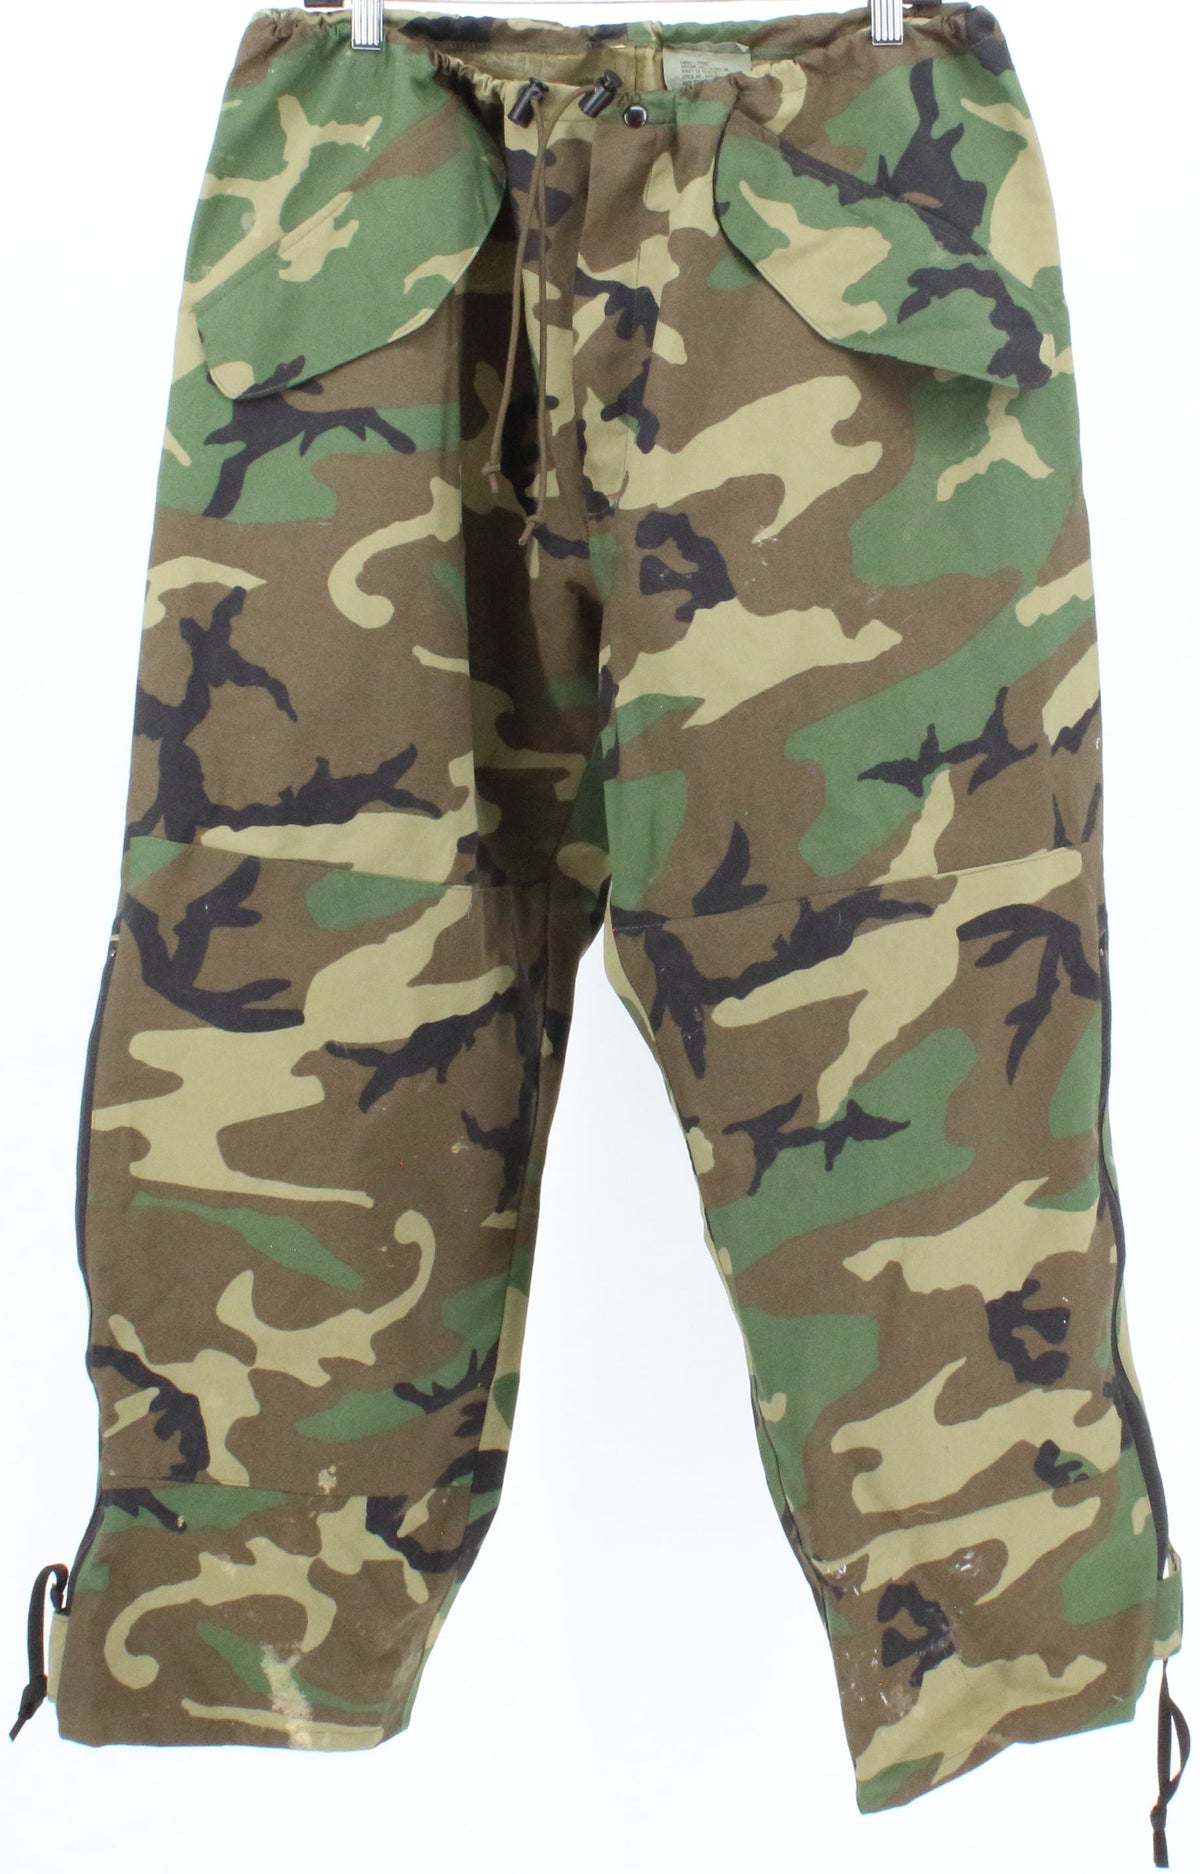 Tennessee Apparel Corp. Cold Weather Camo Trouser